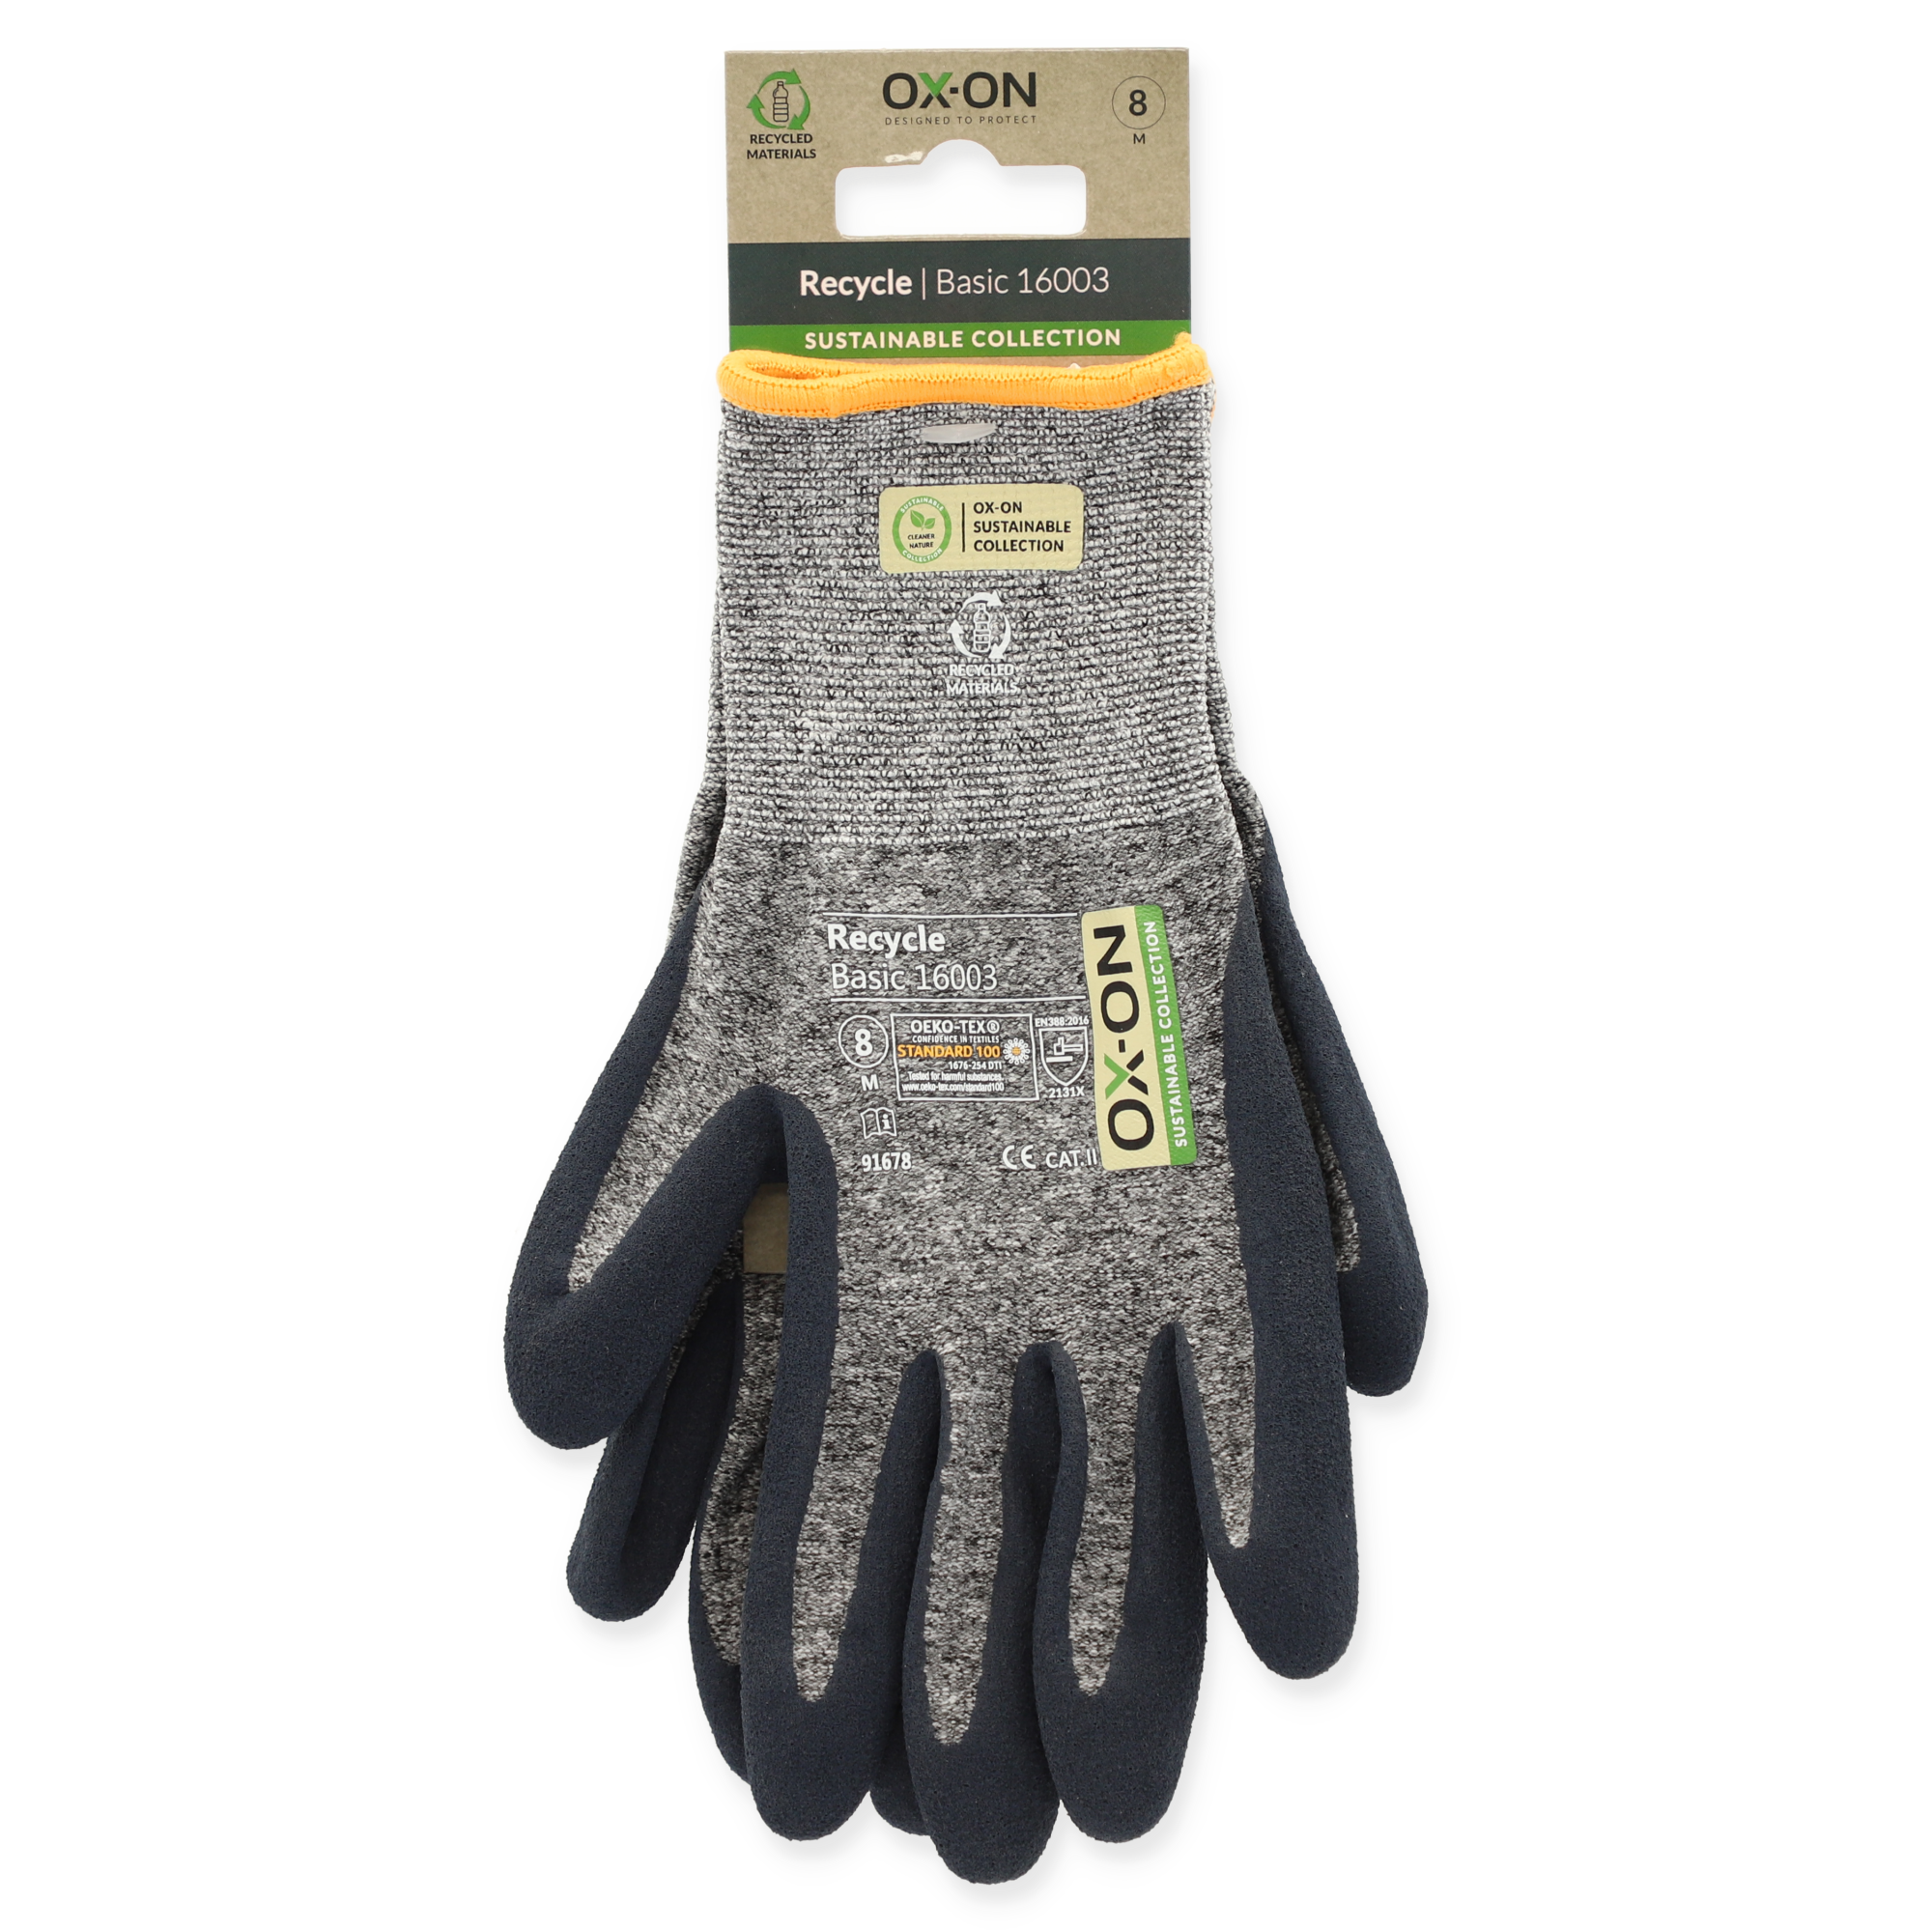 Handschuhe 'Recycle Basic 16003' grau Gr. 9 + product picture